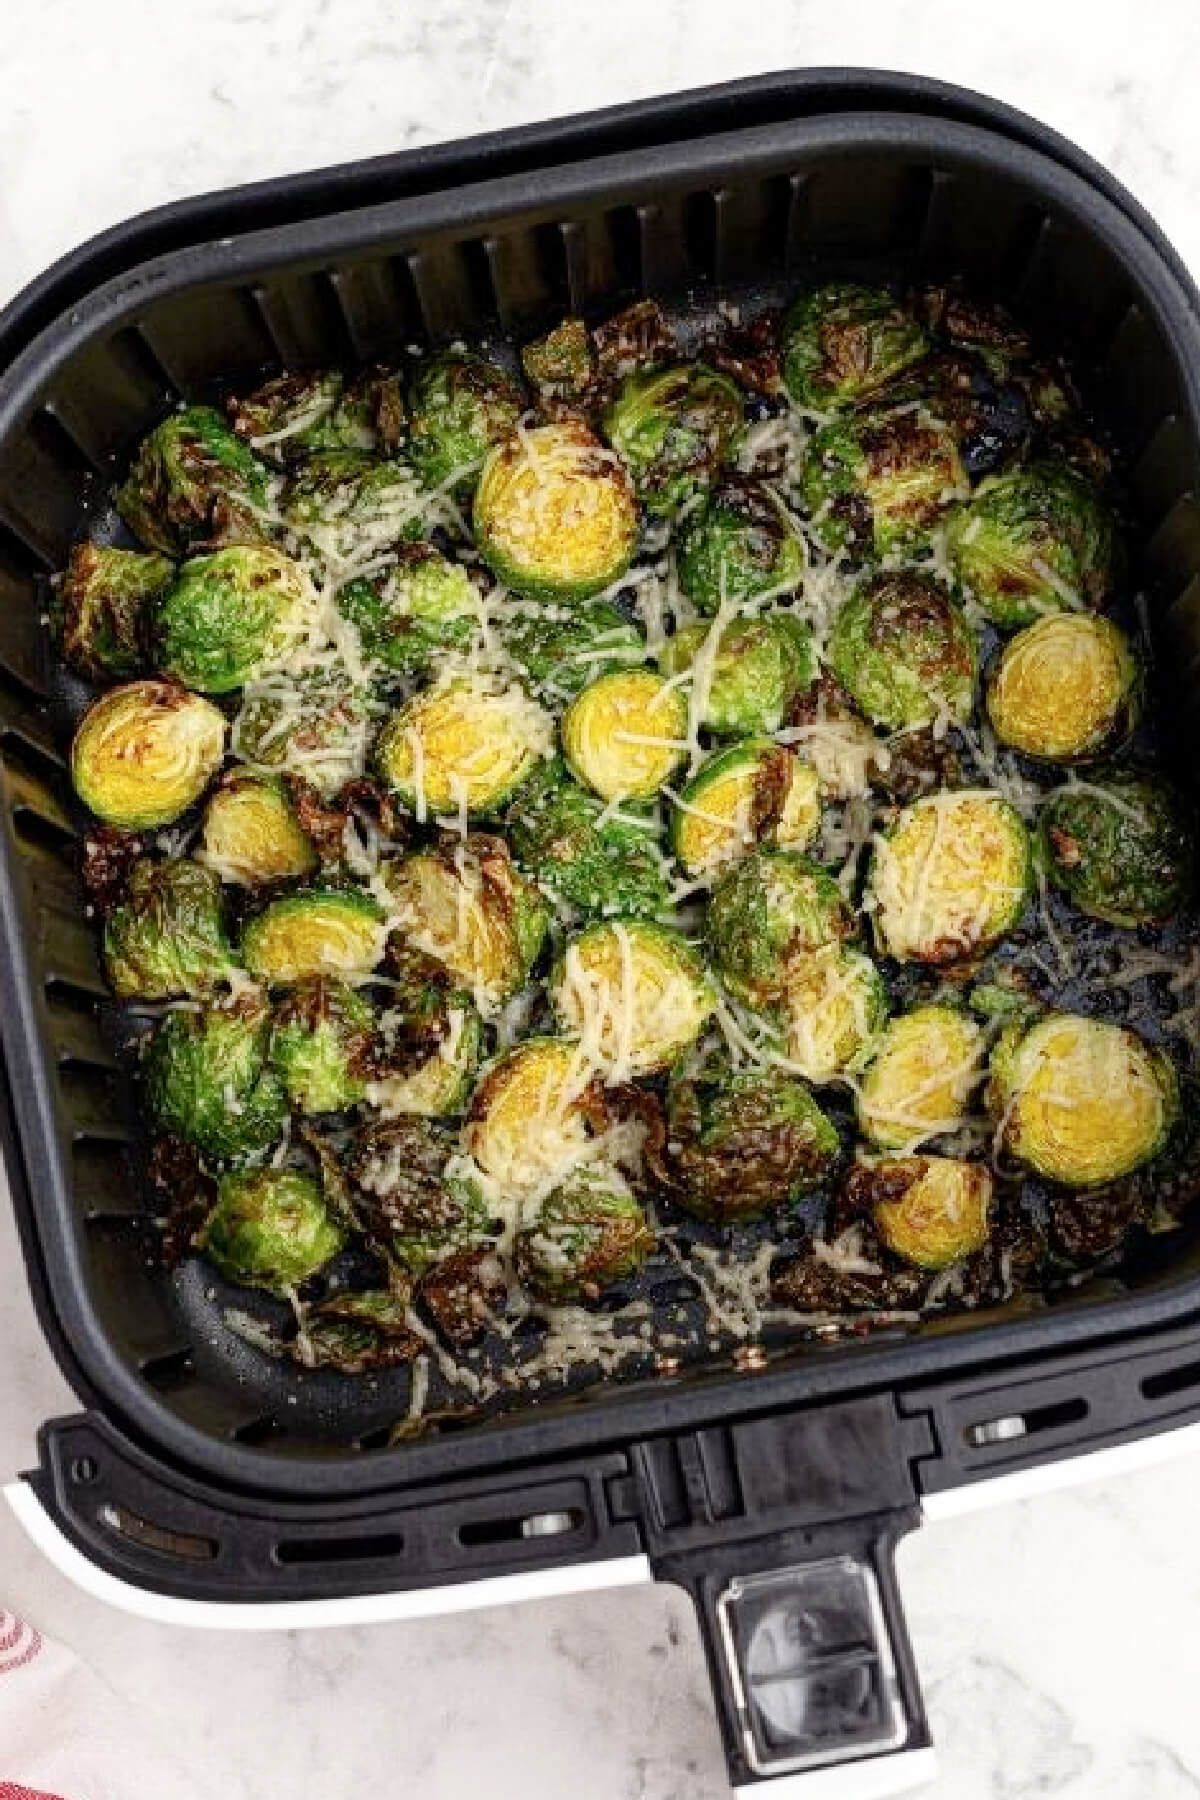 Brussels sprouts air fried and topped with parmesan cheese in the basekt of the air fryer.